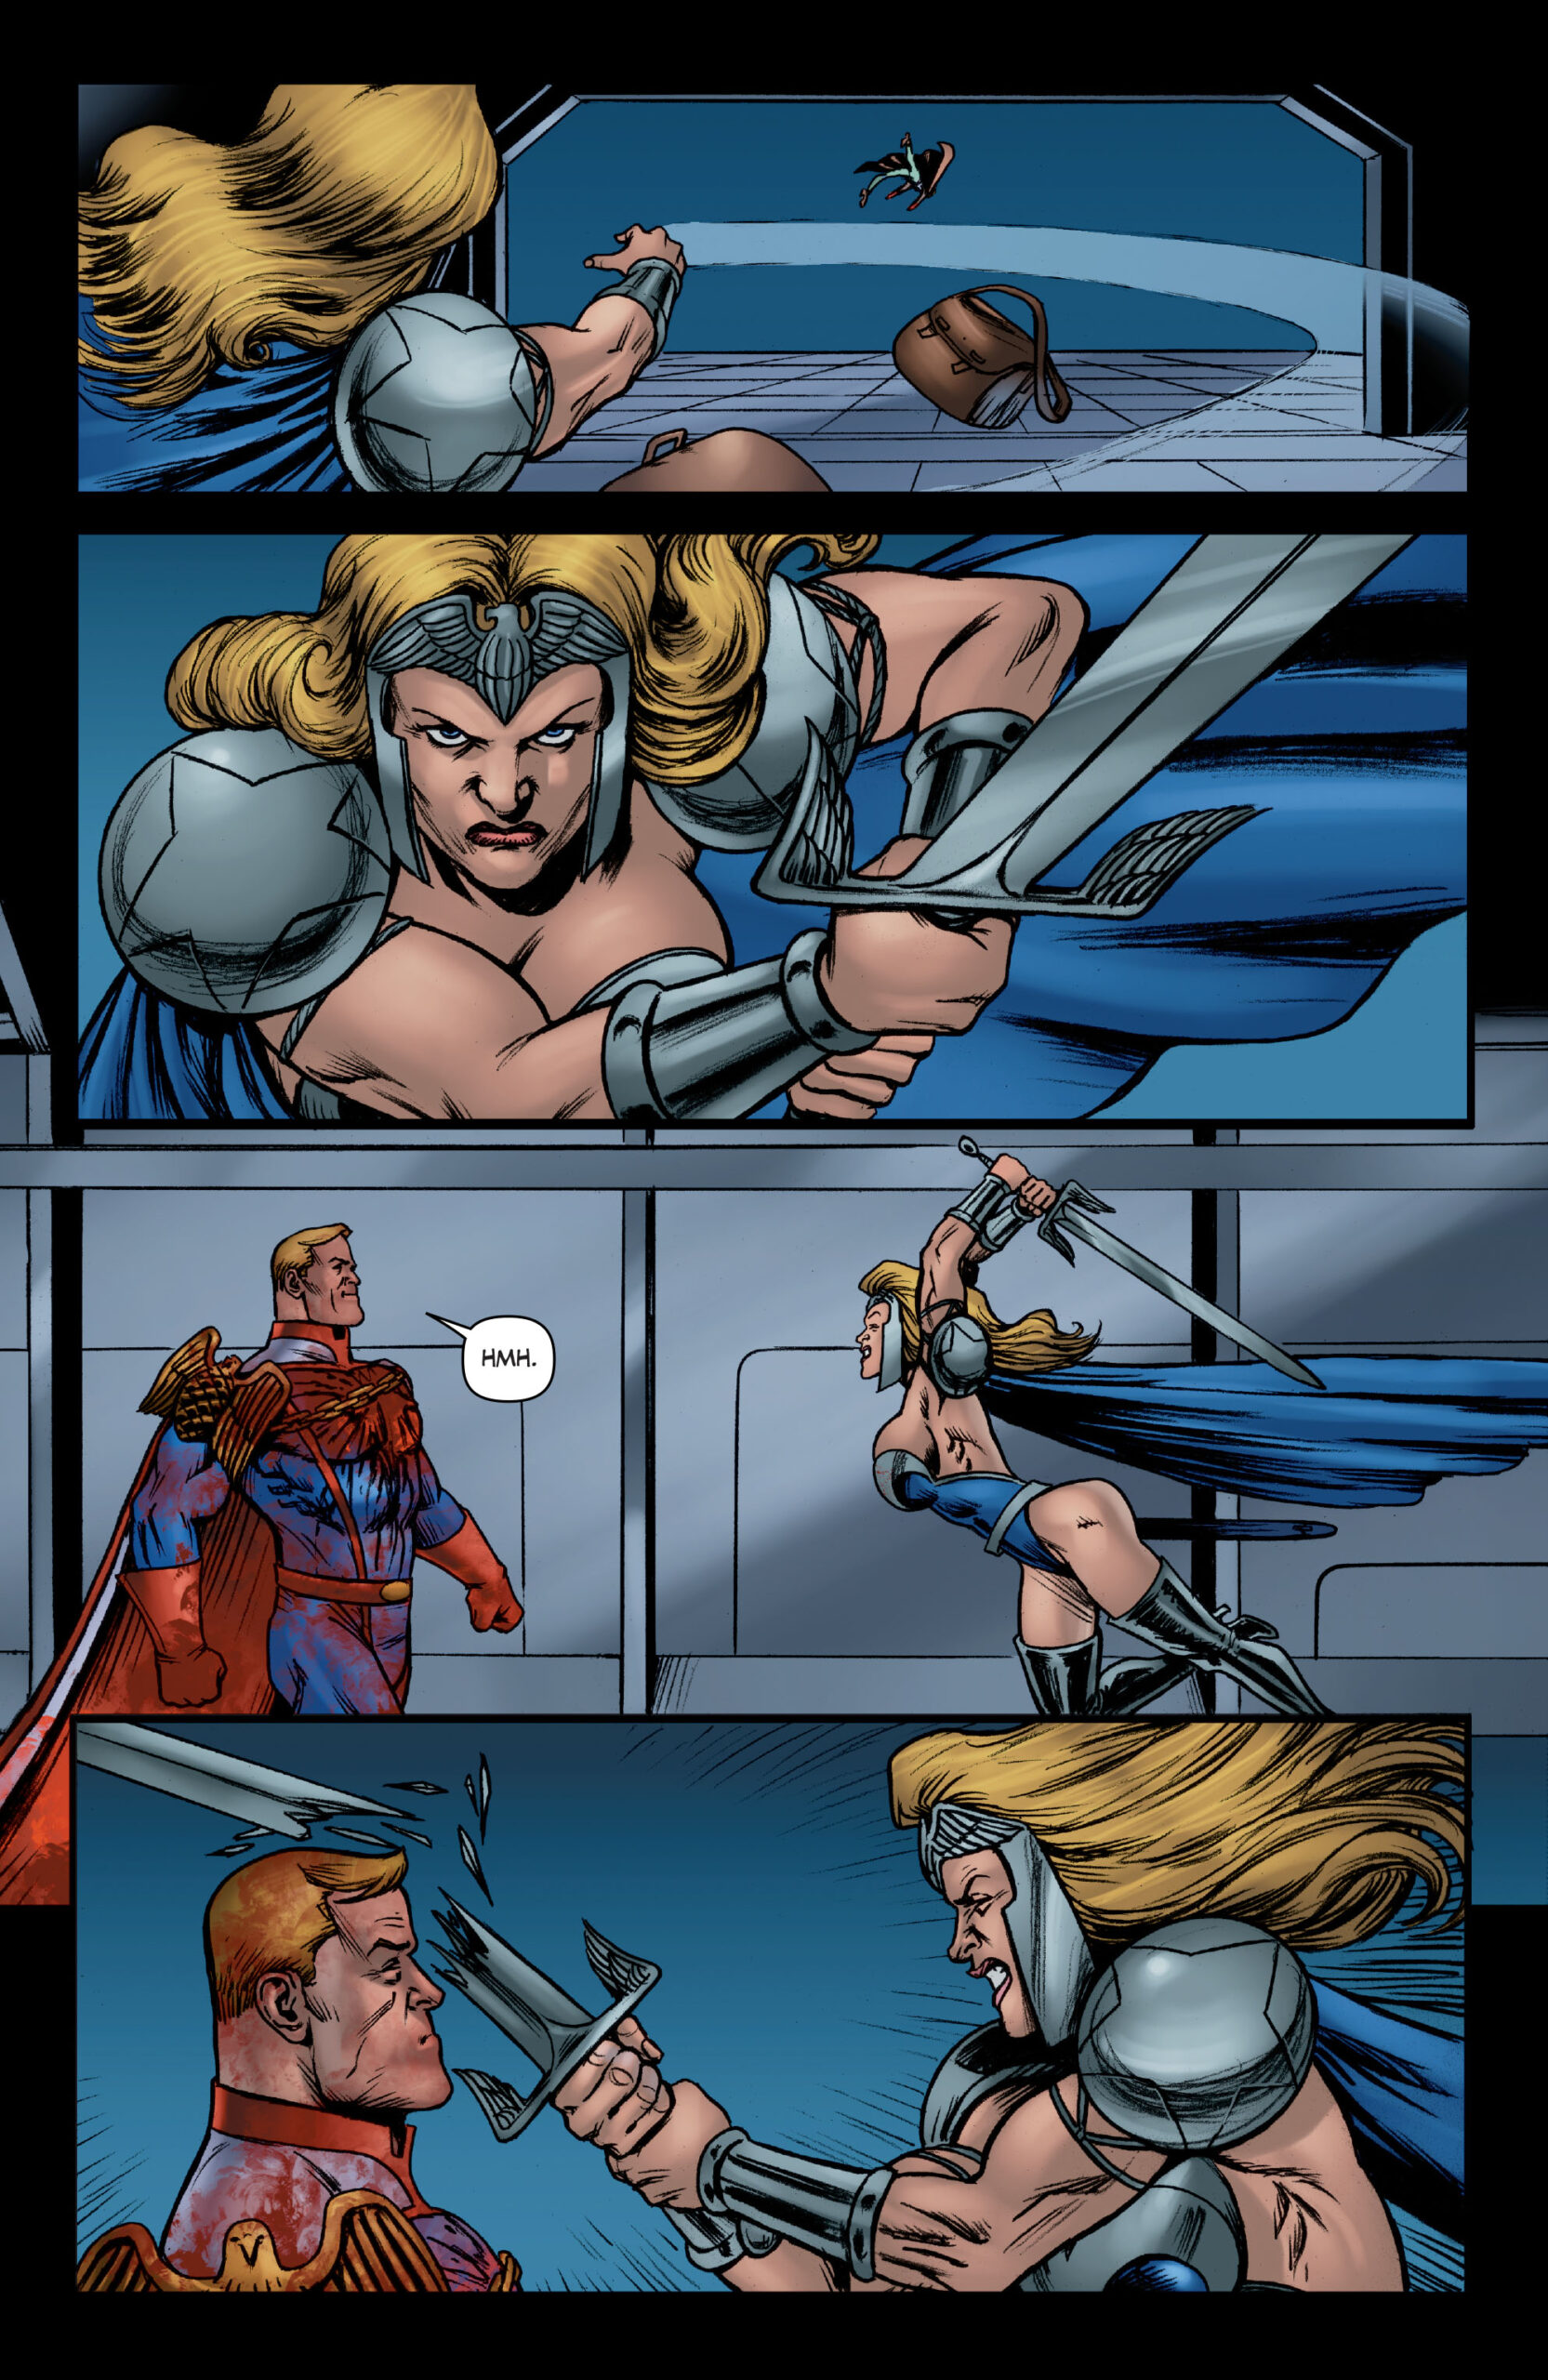 Queen Maeve makes one last stand against Homelander in The Boys Vol. 1 #63 "Over The Hill With The Swords Of A Thousand Men: Part Four" (2012), Dynamite Comics. Words by Garth Ennis, at by Russell Braun, Darick Robertson, Tony Aviña, and Simon Bowland.